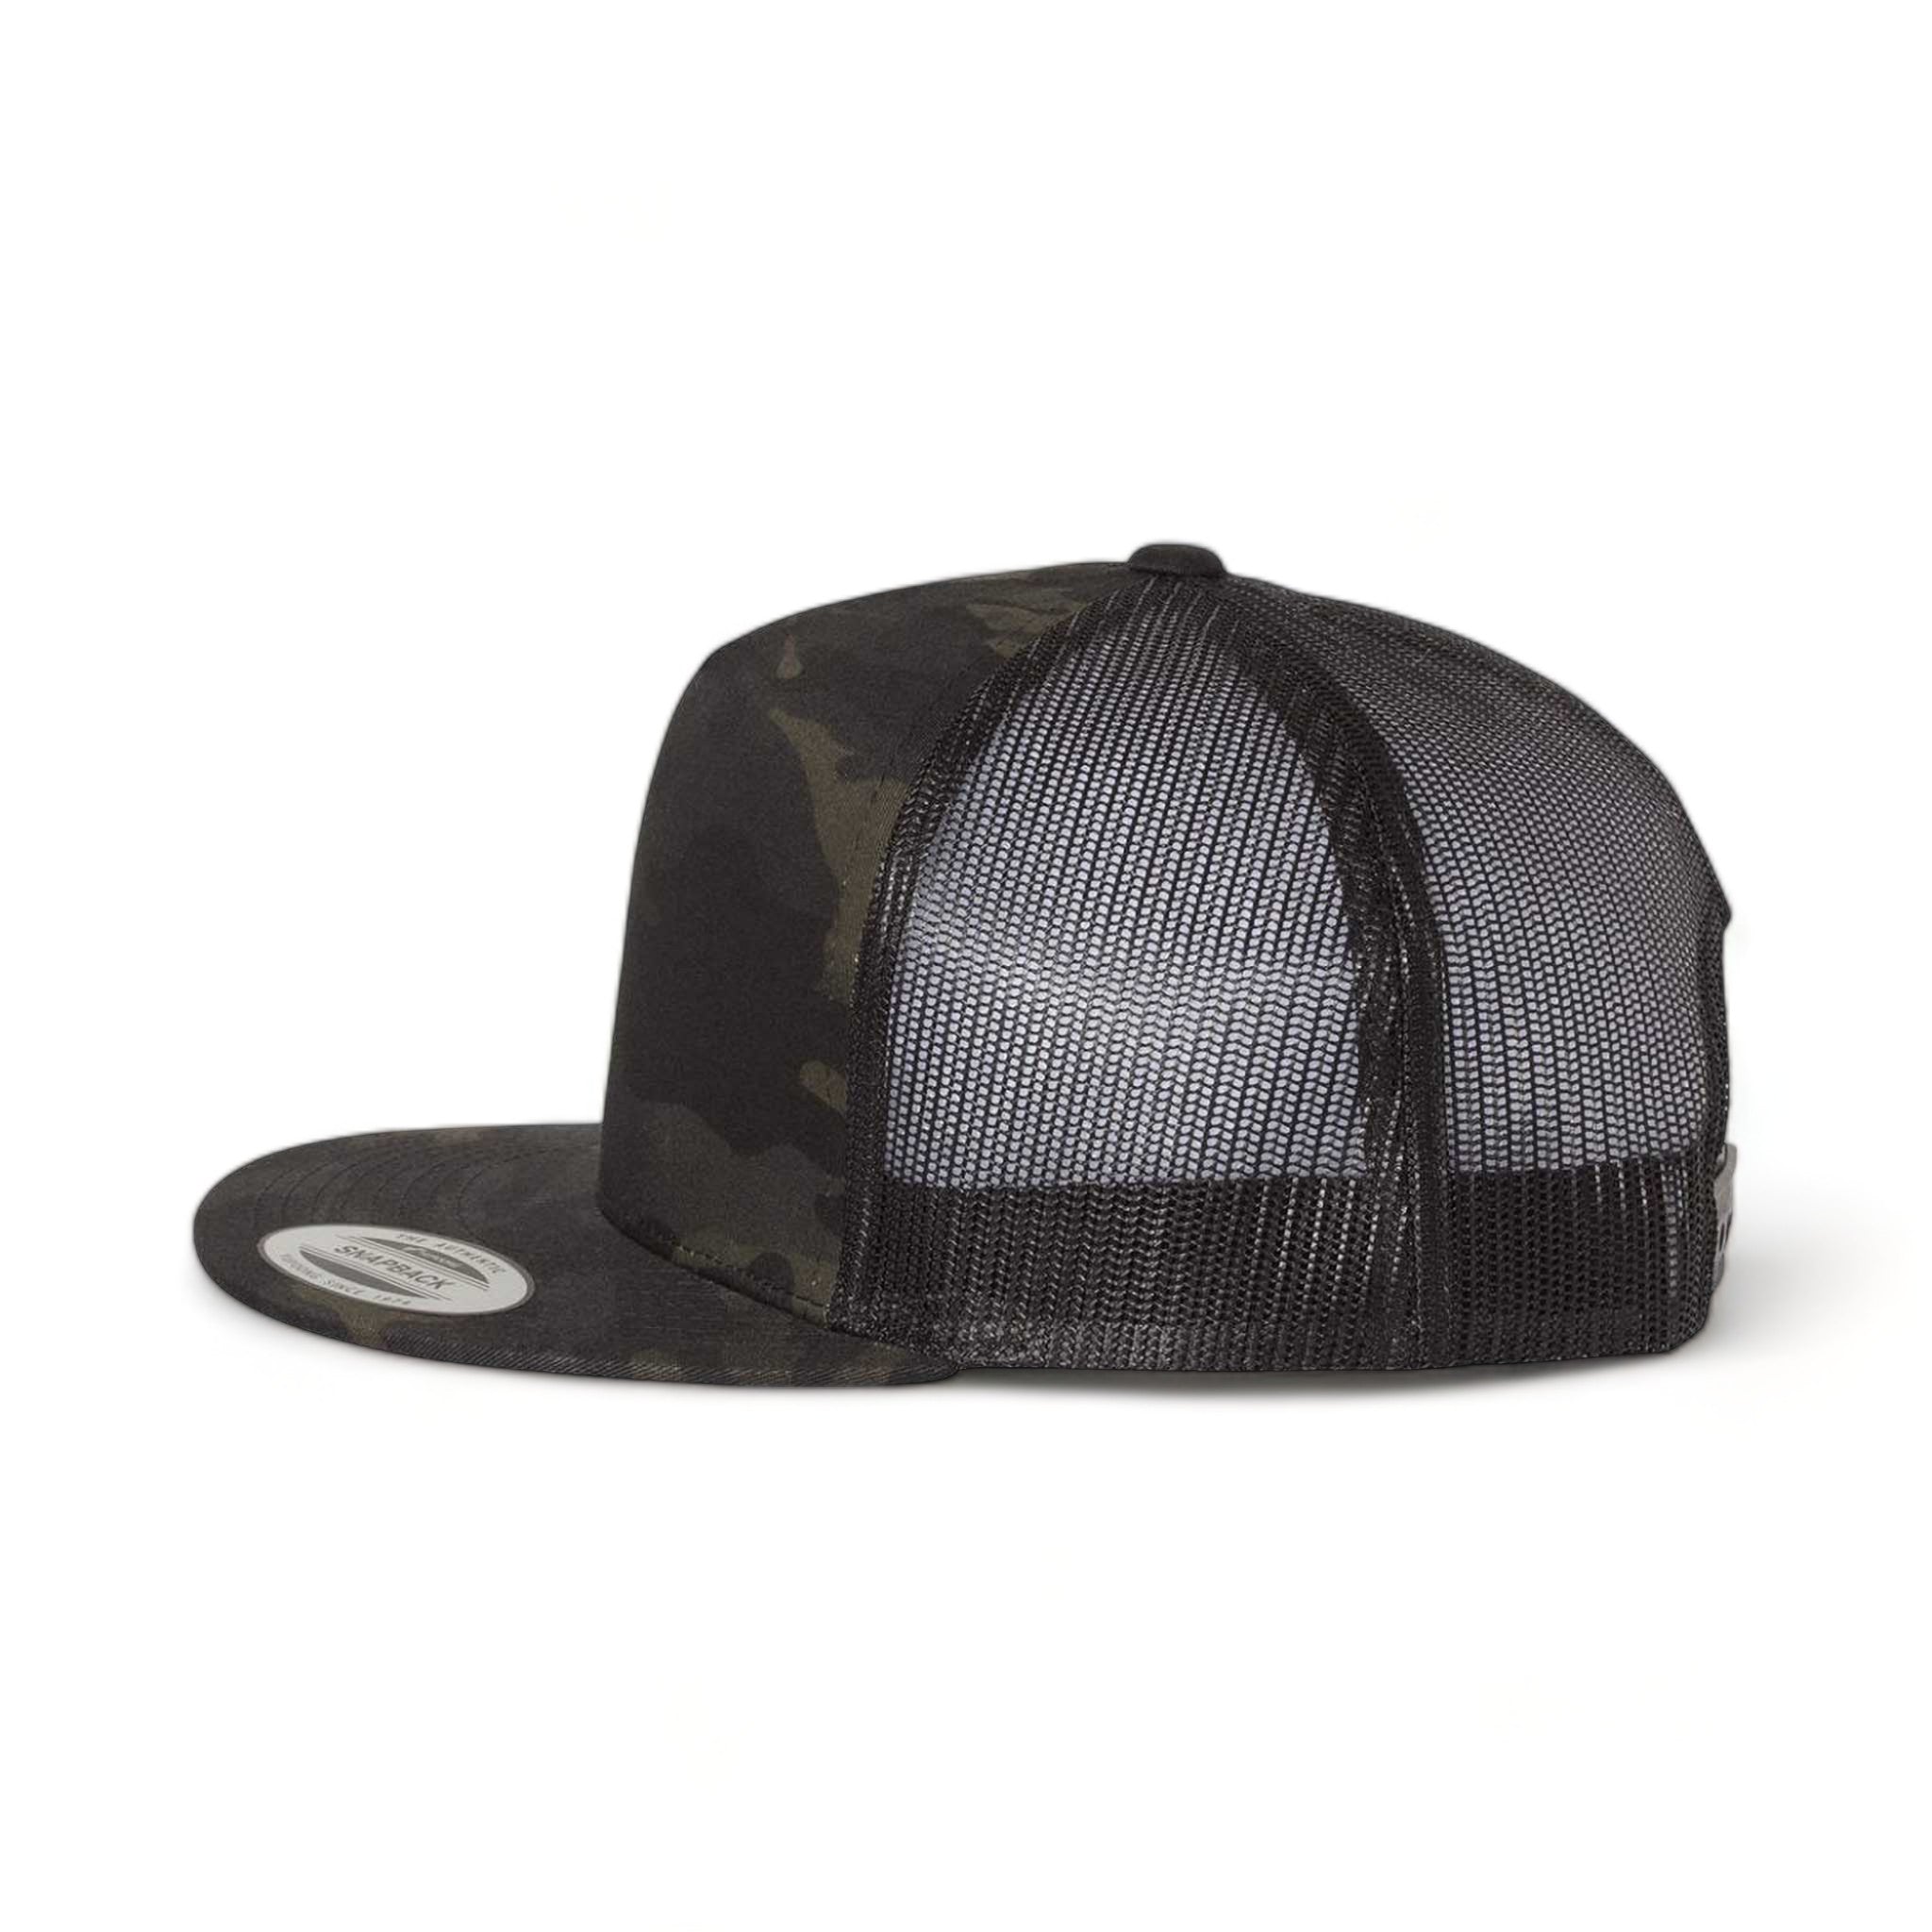 Side view of YP Classics 6006 custom hat in multicam black and black